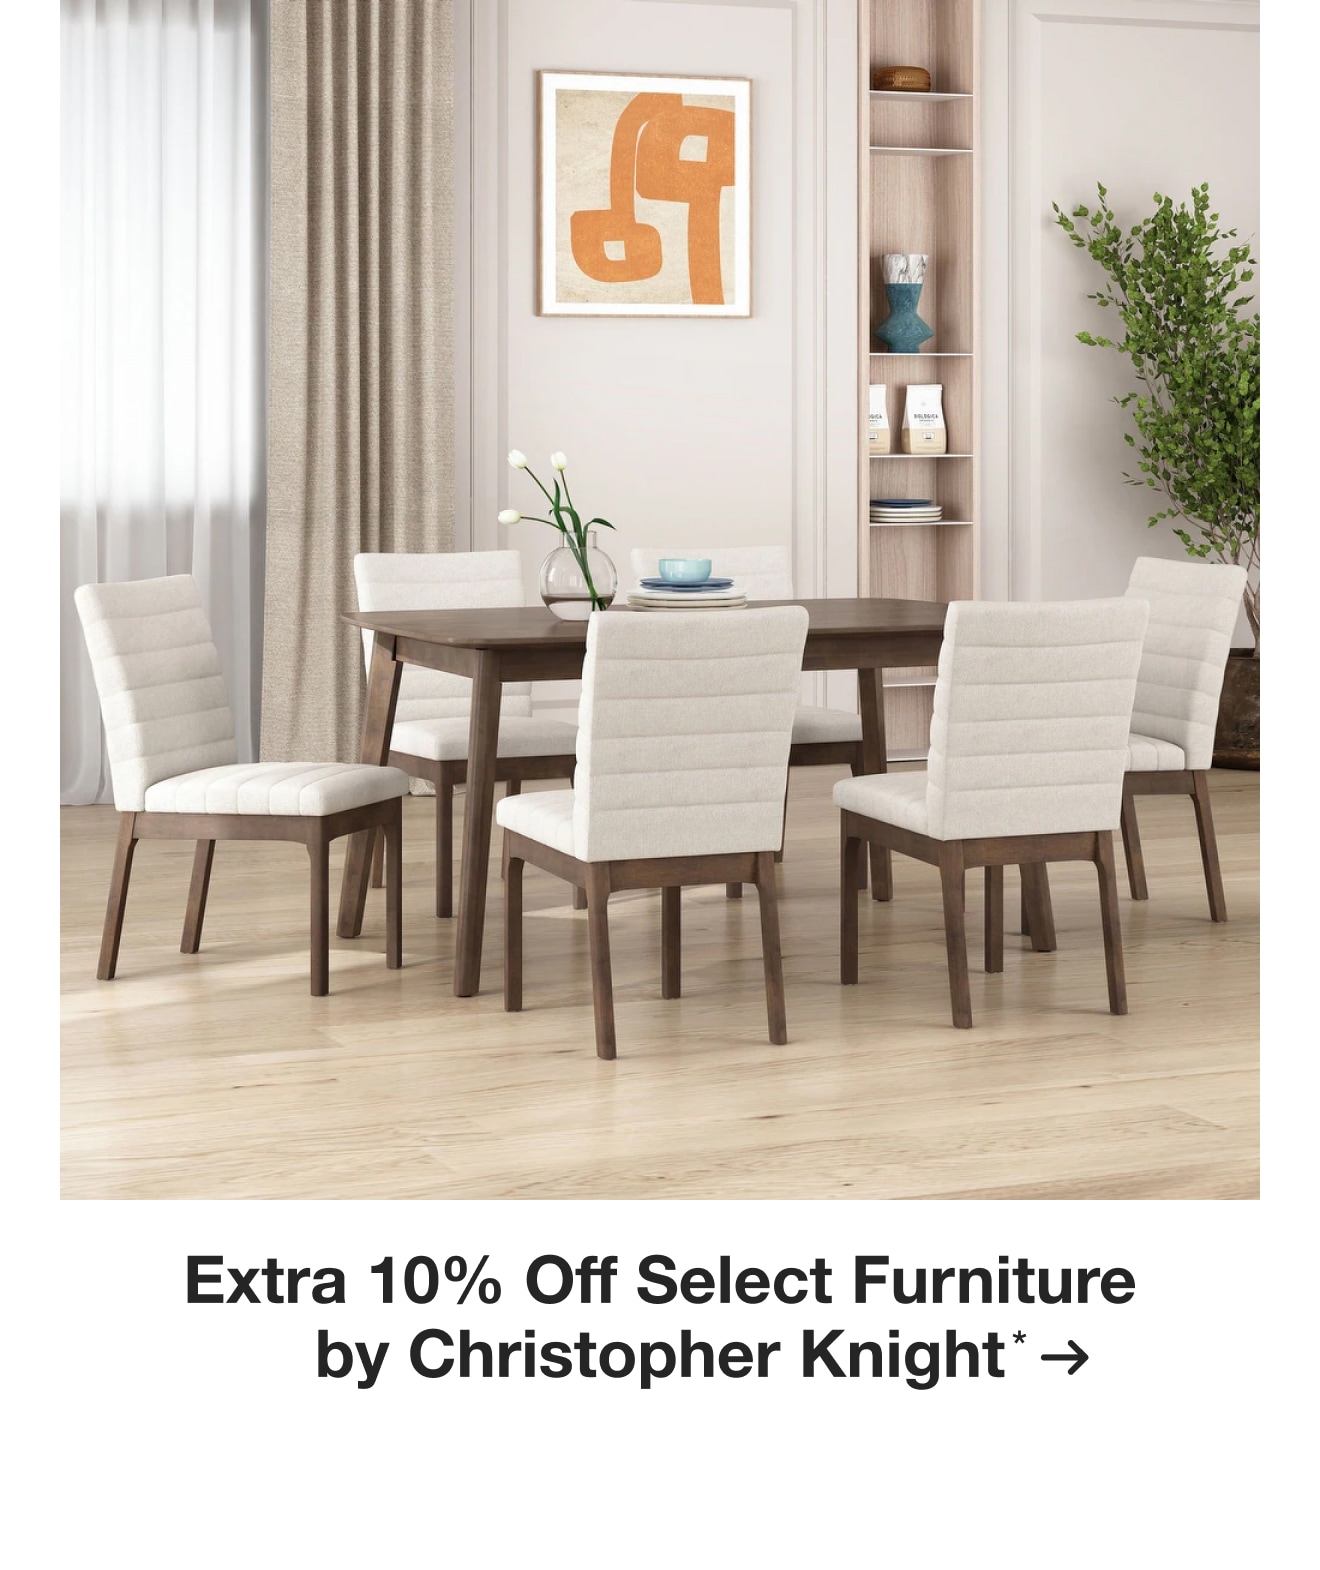 Up to 10% off Select Furniture by Christopher Knight*